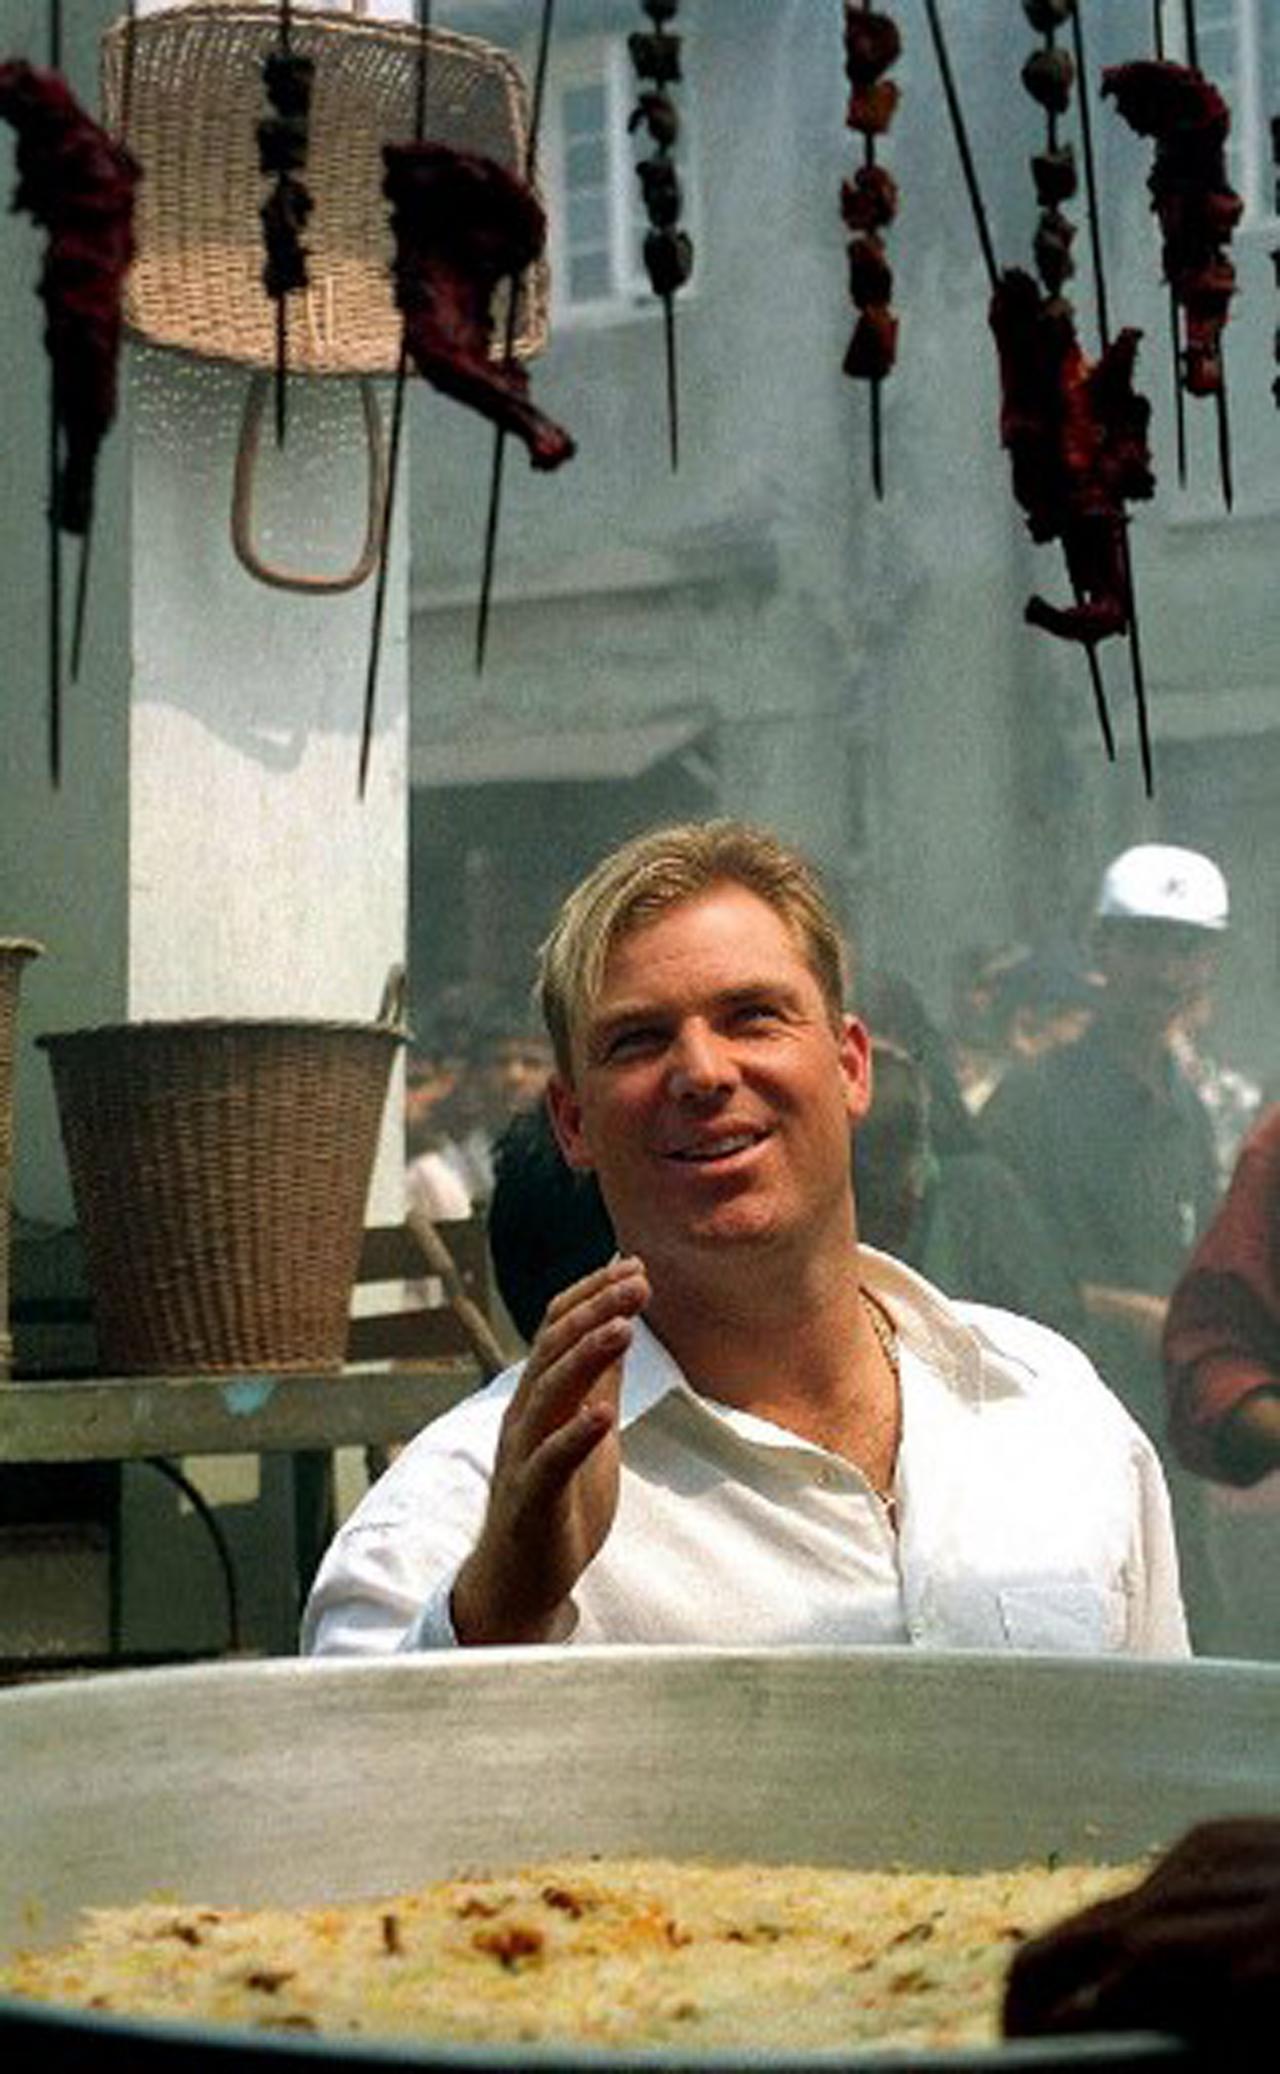 Shane Warne played 194 ODIs and took 293 wickets with best bowling figures of 5/33. In pic: Warne looks up at some kebabs and grilled chicken during a photoshoot in Mumbai in 2001.